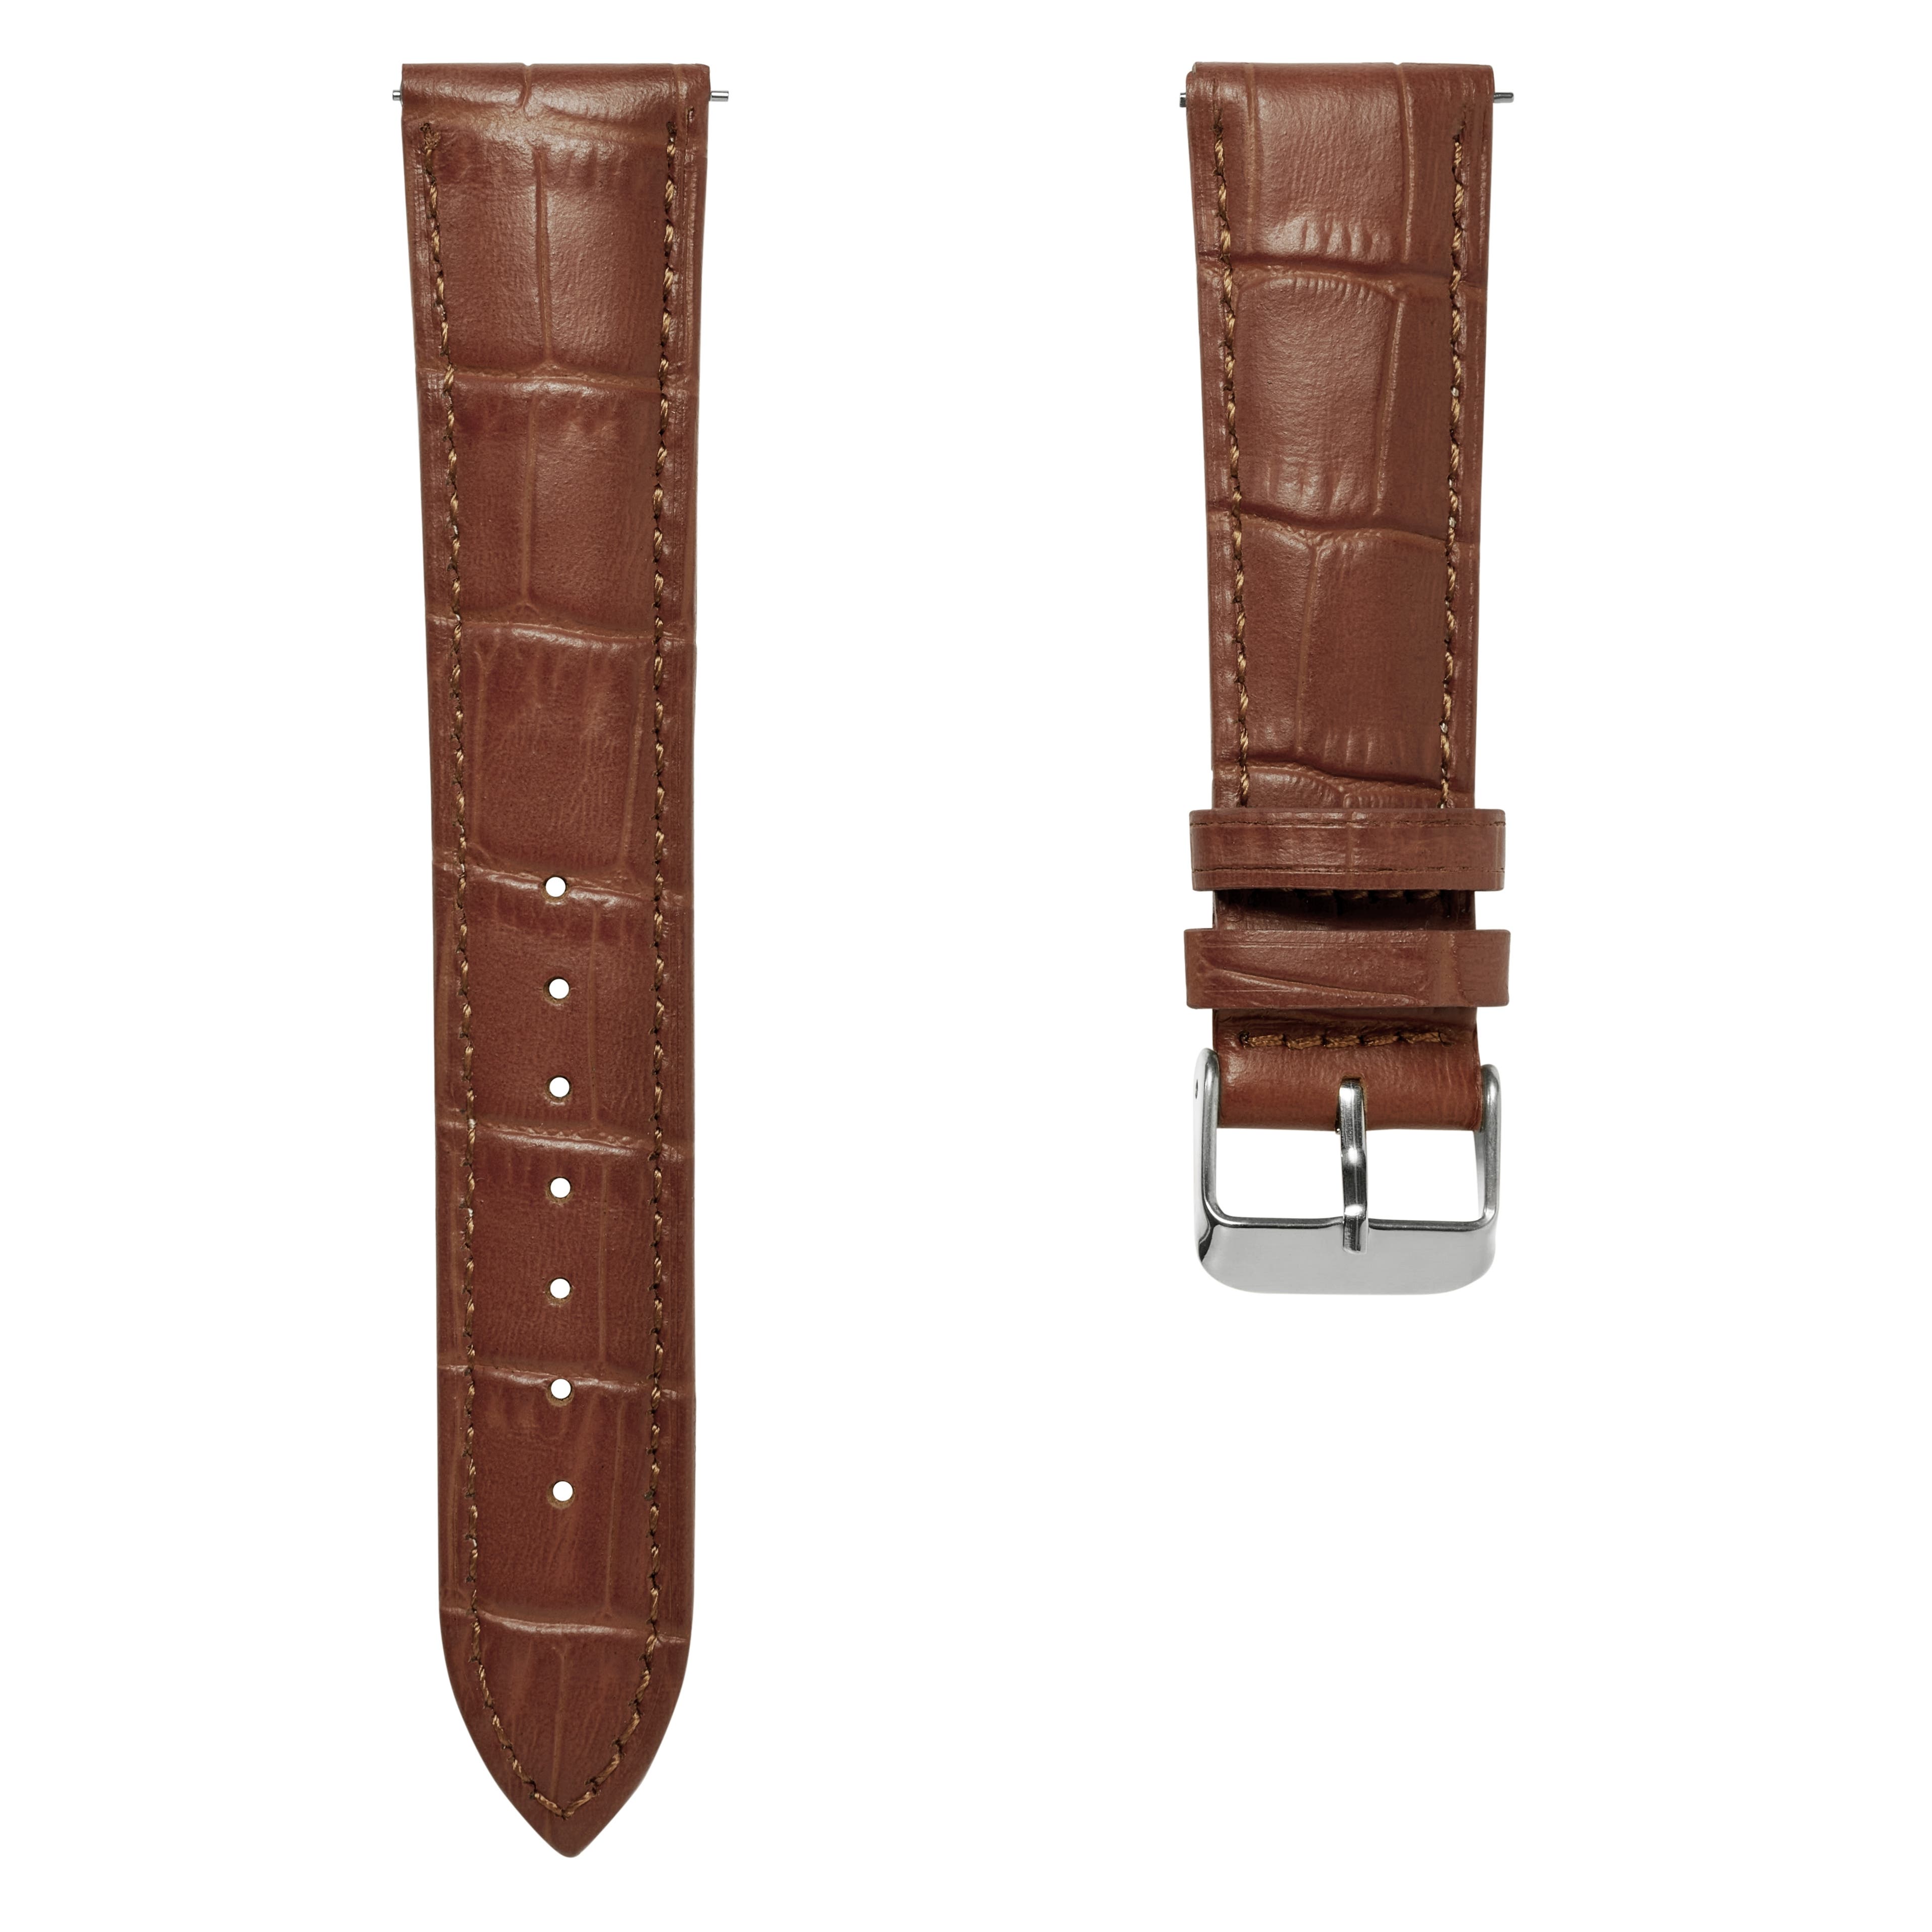 4/5" (20 mm) Crocodile-Embossed Tan Leather Watch Strap with Silver-Tone Buckle – Quick Release